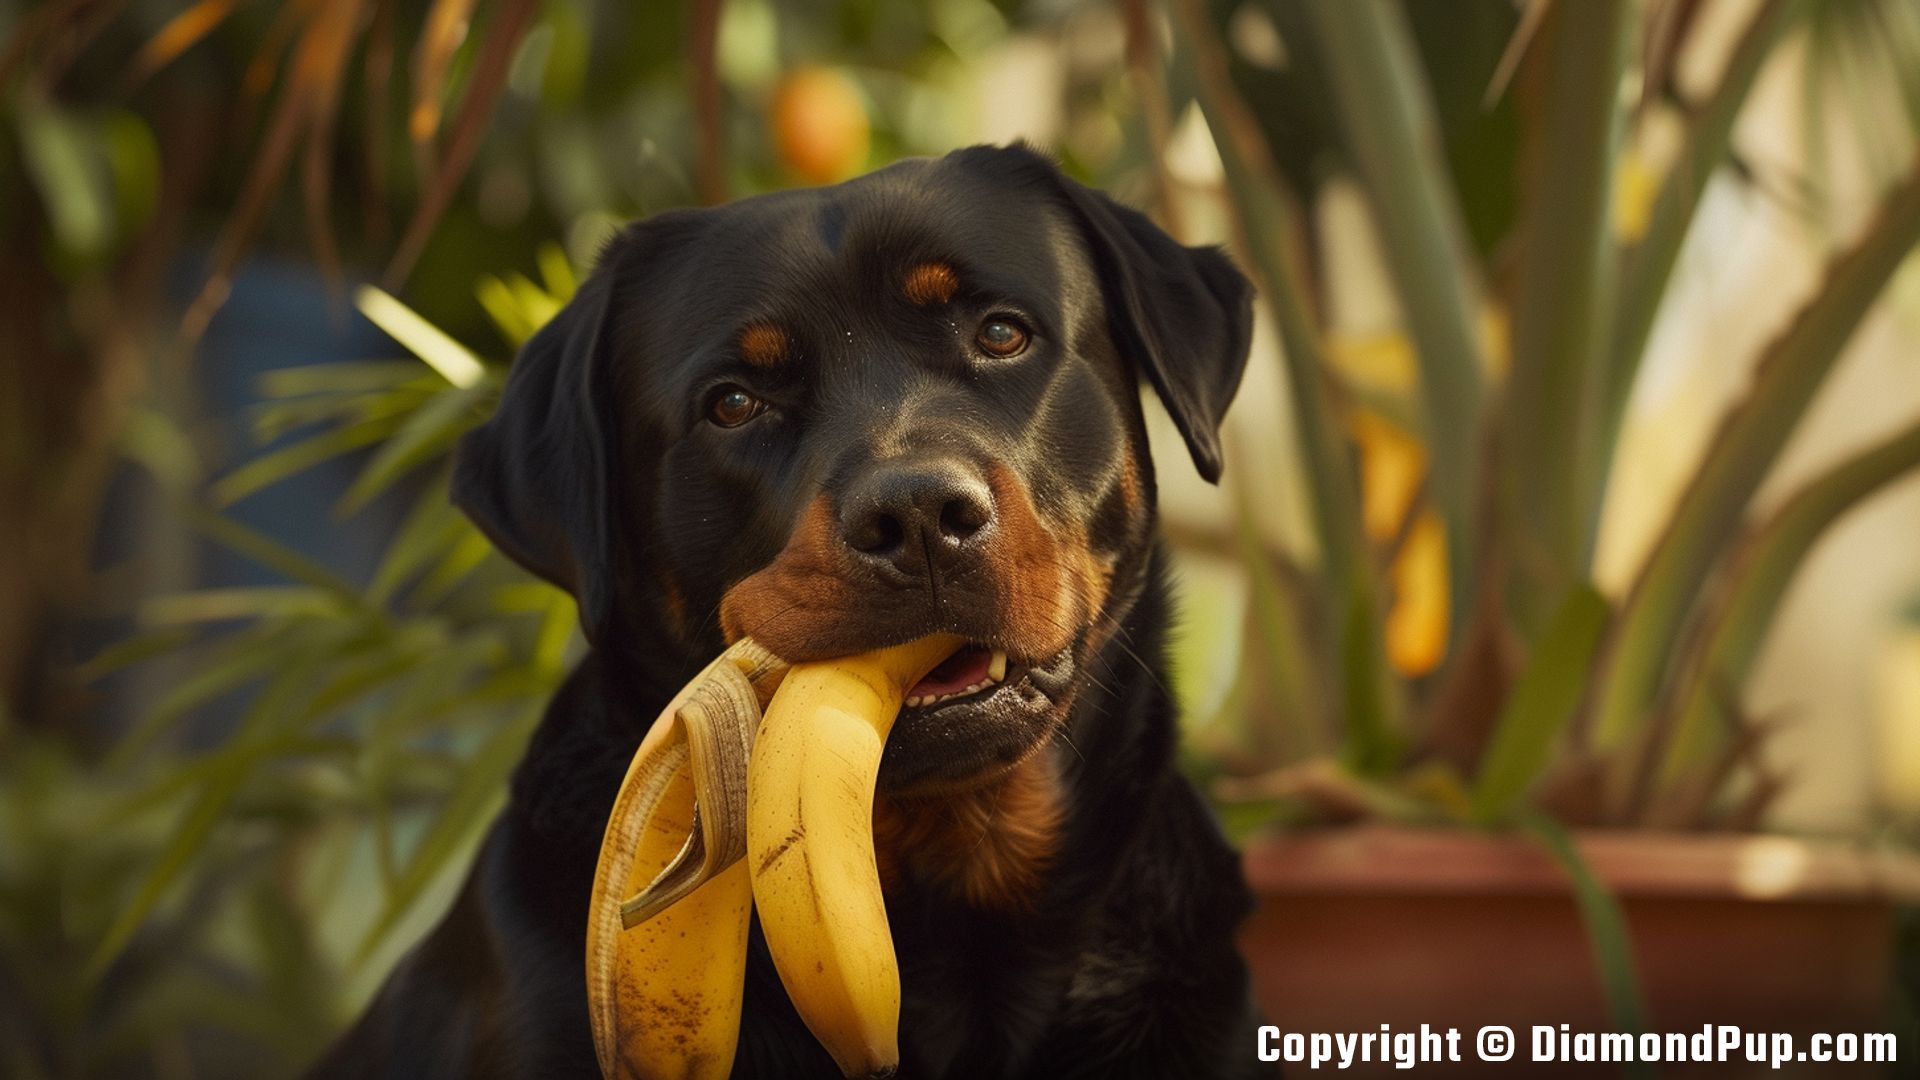 Photograph of a Happy Rottweiler Snacking on Banana